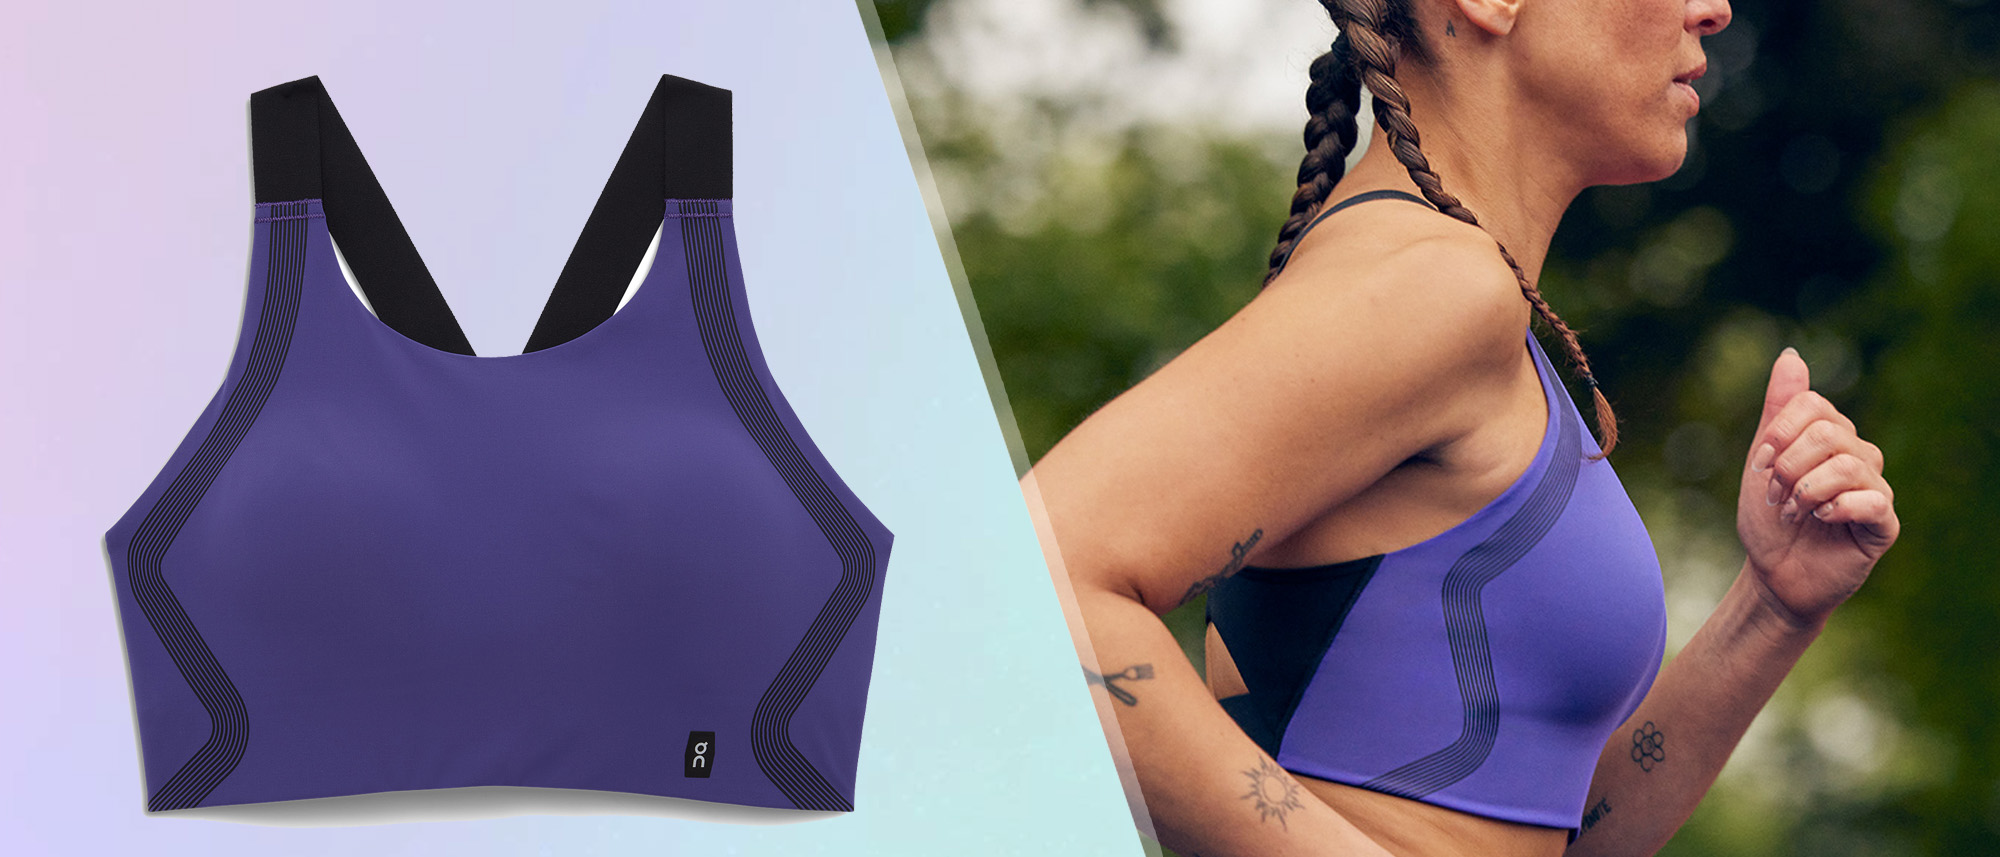 Lululemon Run Times bra: Tried and tested